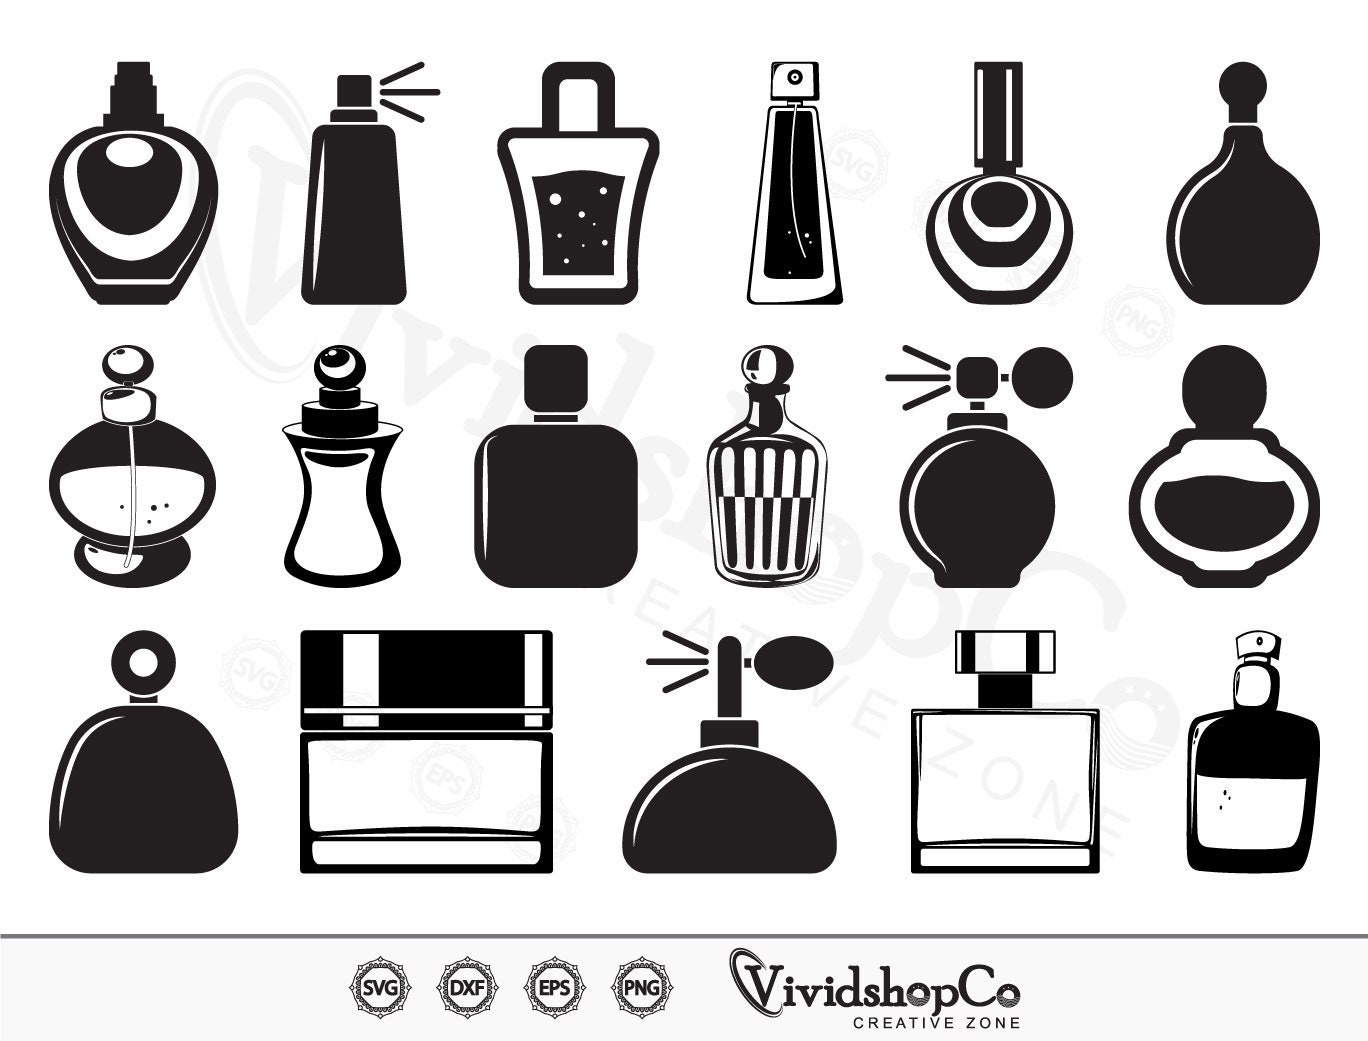 louis vuitton svg Archives - Digital Download files for Cricut, Silhouette  Cameo, and more